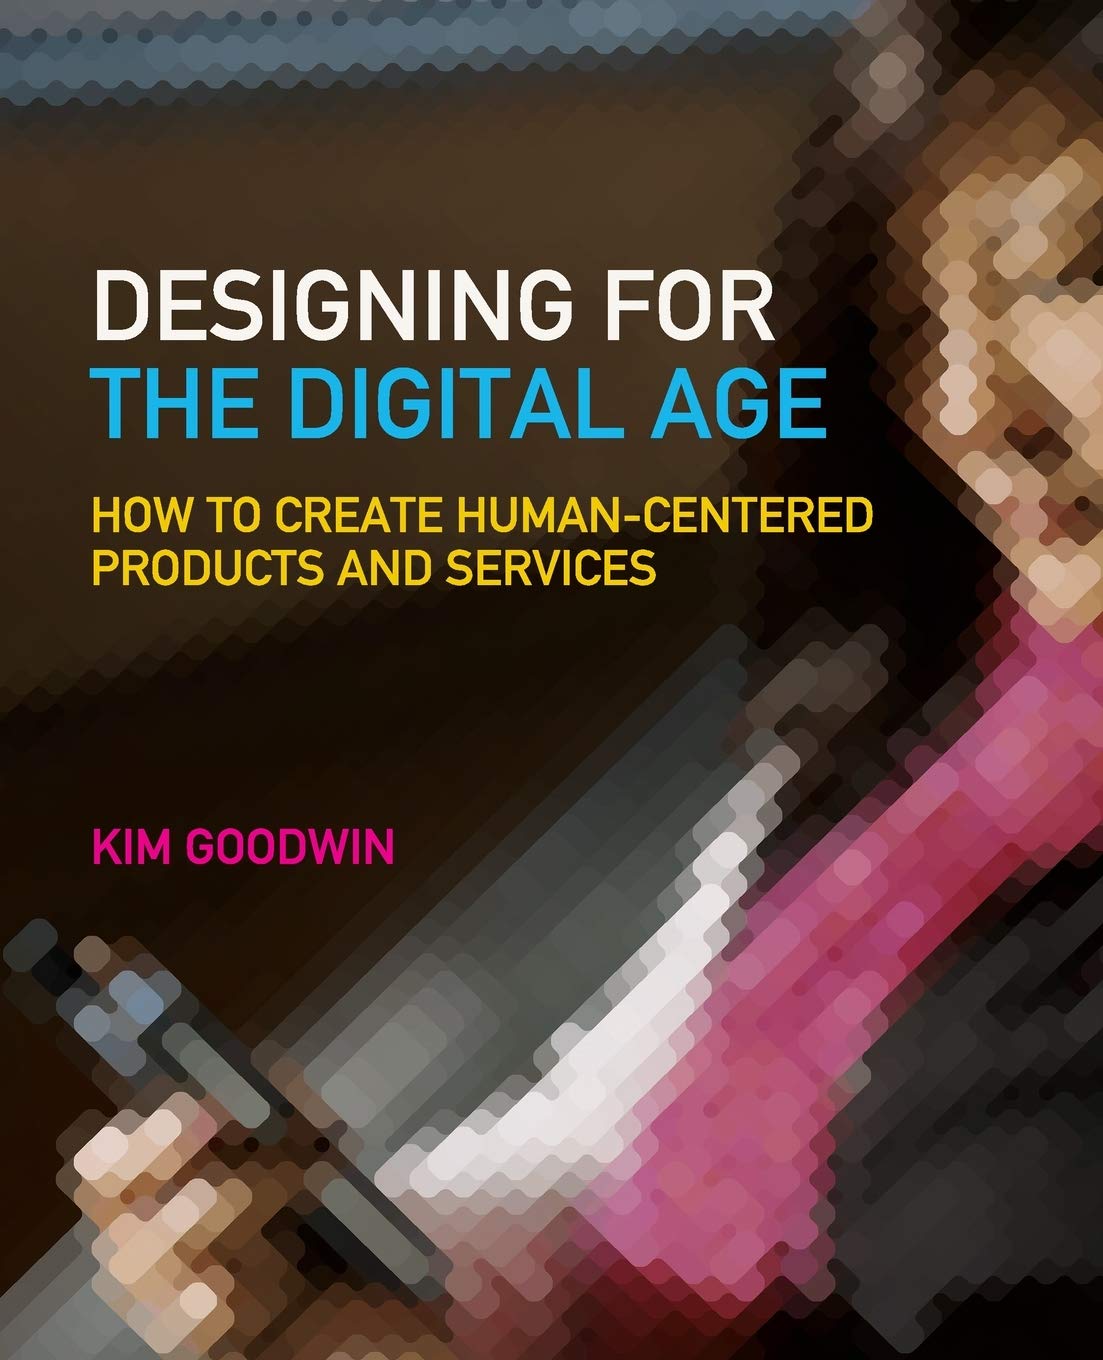 Designing for the Digital Age by Kim Goodwin